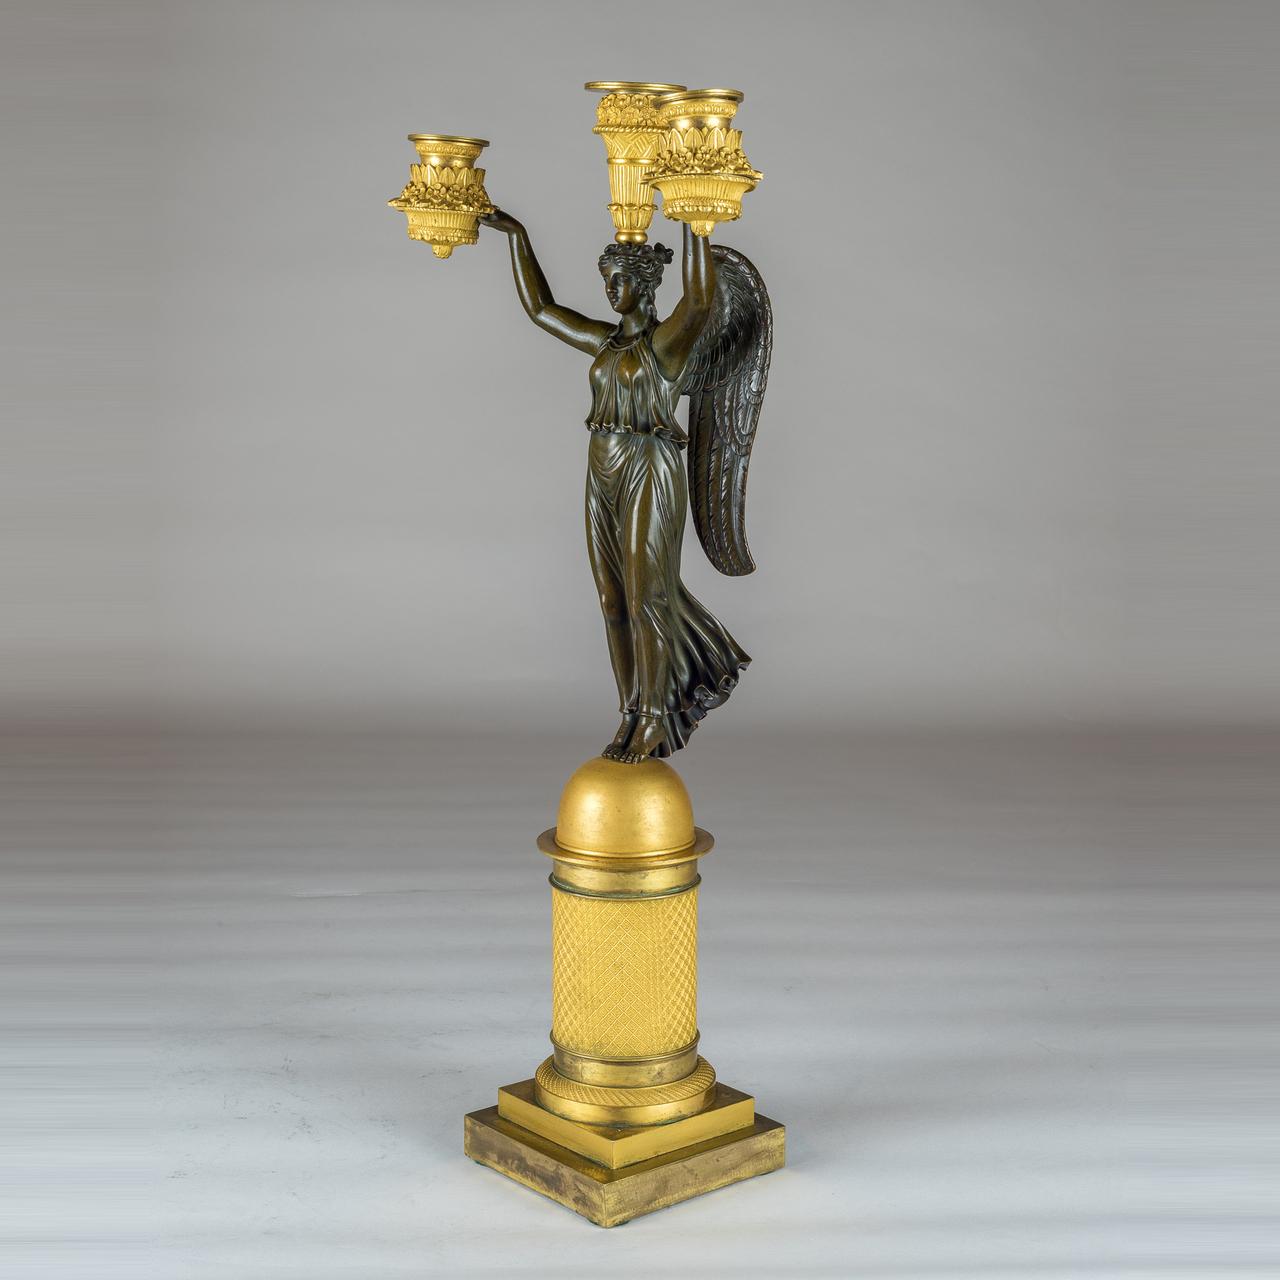 Each winged victory figure stand tipped-toed on a polished sphere. Her arms almost weightless as they comfortably lift the immense weight above her shoulders. ?

Origin: French
Date: 19th Century
Dimension: Height: 20 3/4 in.